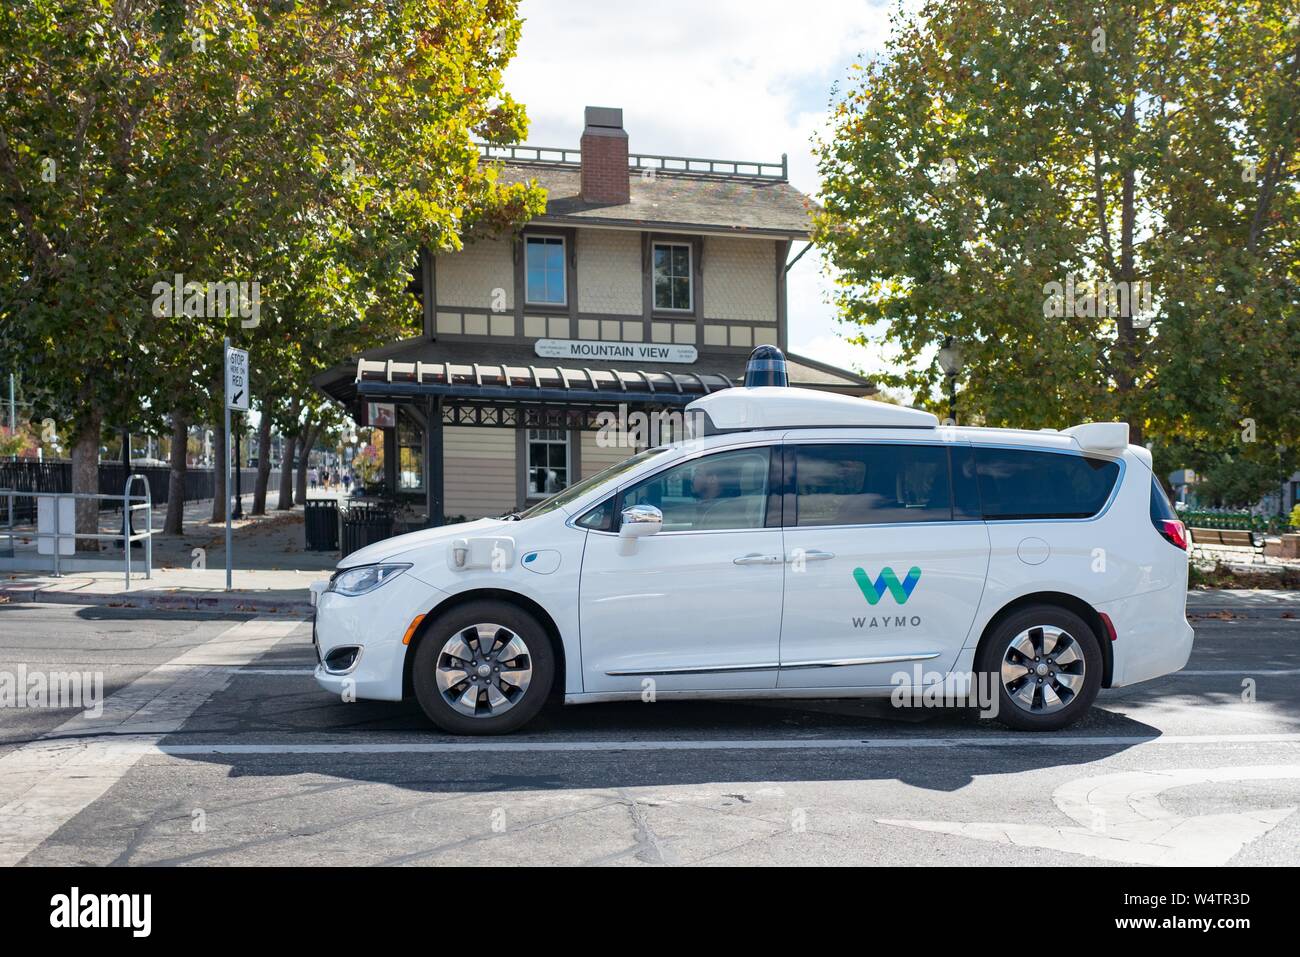 Close-up of self driving minivan, with LIDAR and other sensor units and logo visible, part of Google parent company Alphabet Inc, driving past historic railroad station with sign reading Mountain View, in the Silicon Valley town of Mountain View, California, with safety driver visible, October 28, 2018. () Stock Photo